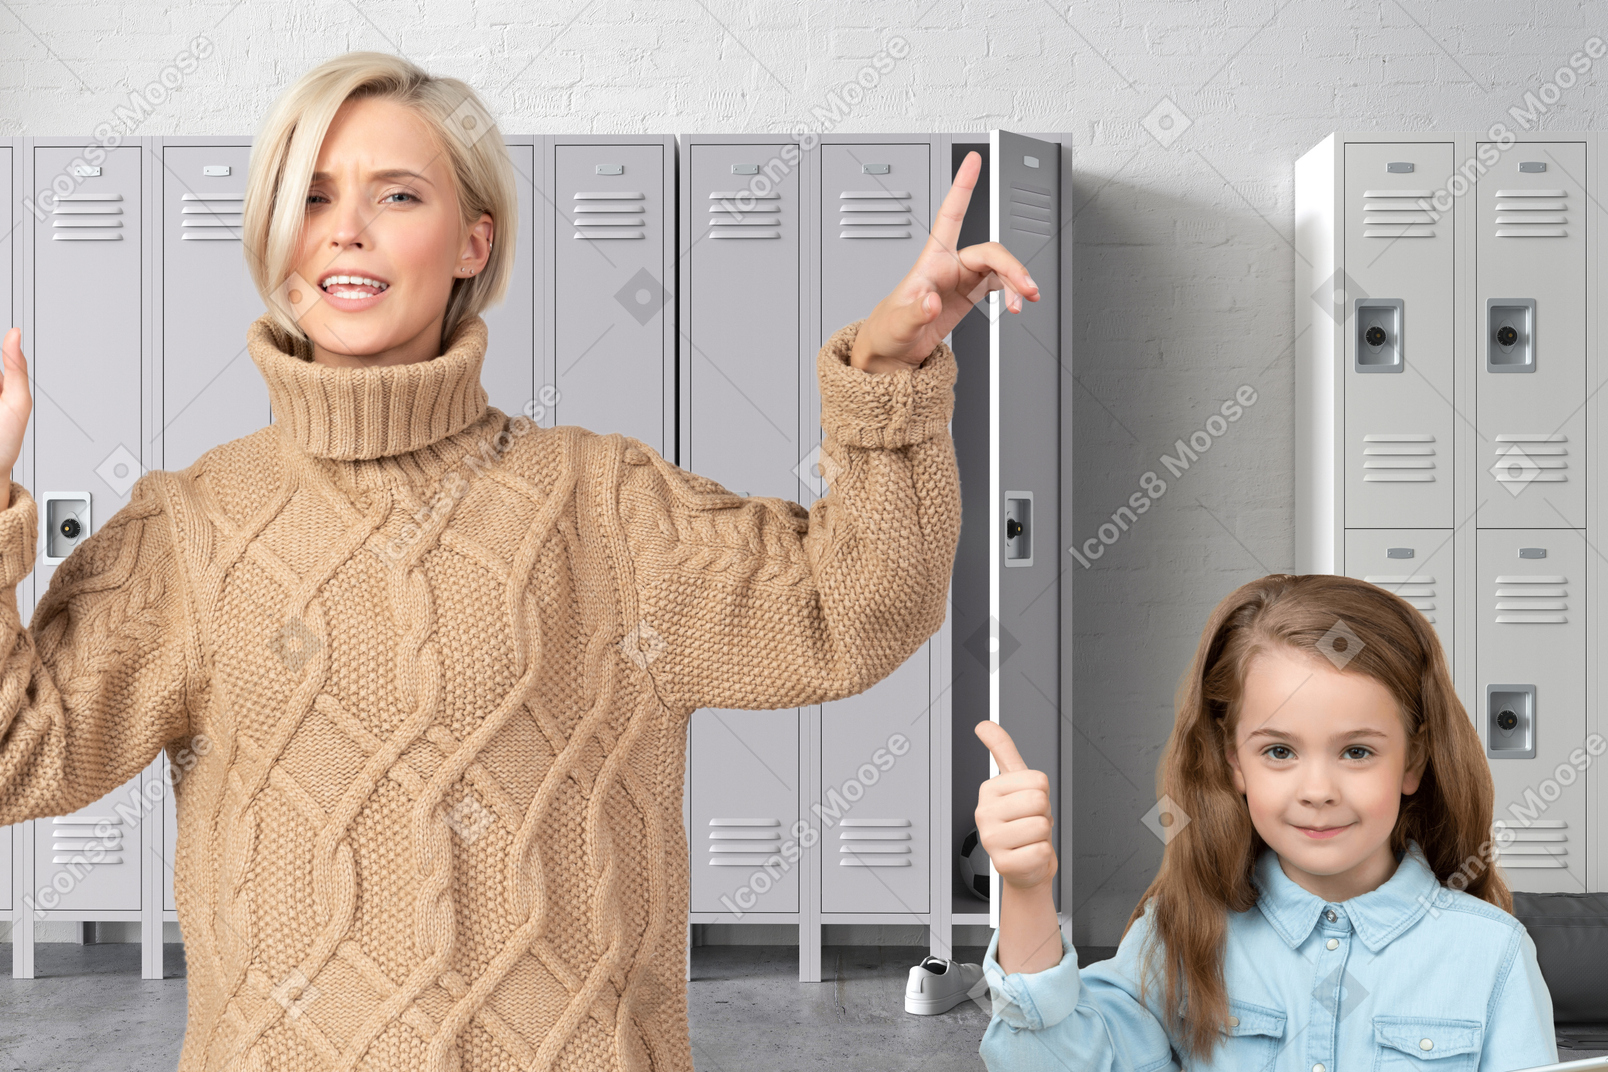 A woman standing next to a little girl in front of lockers